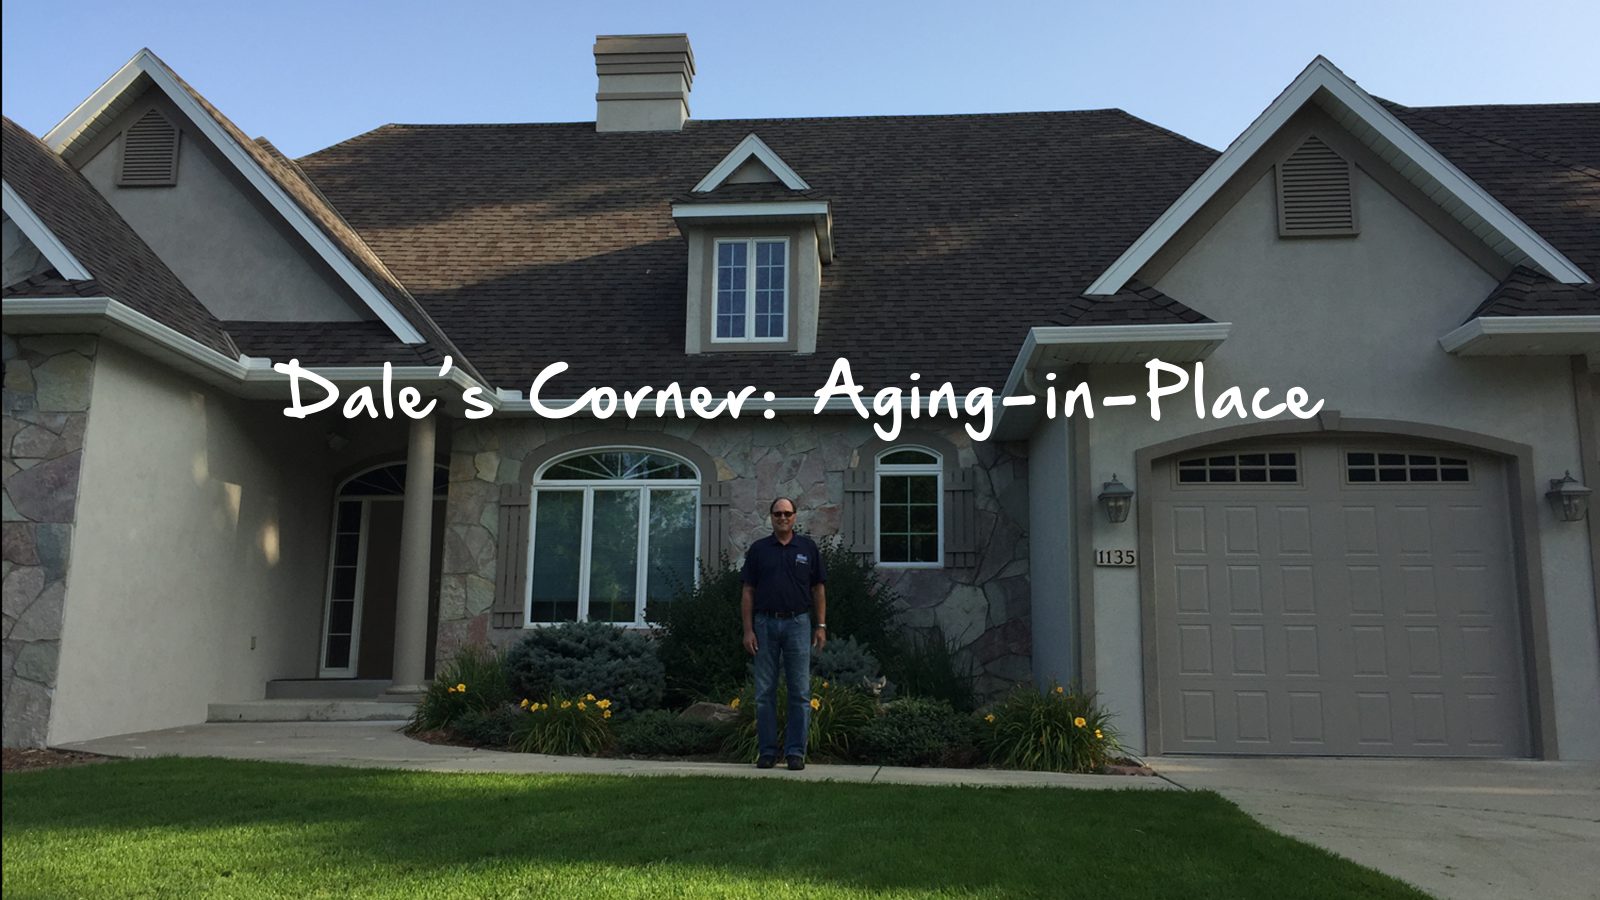 Dale’s Corner: Aging-in-Place